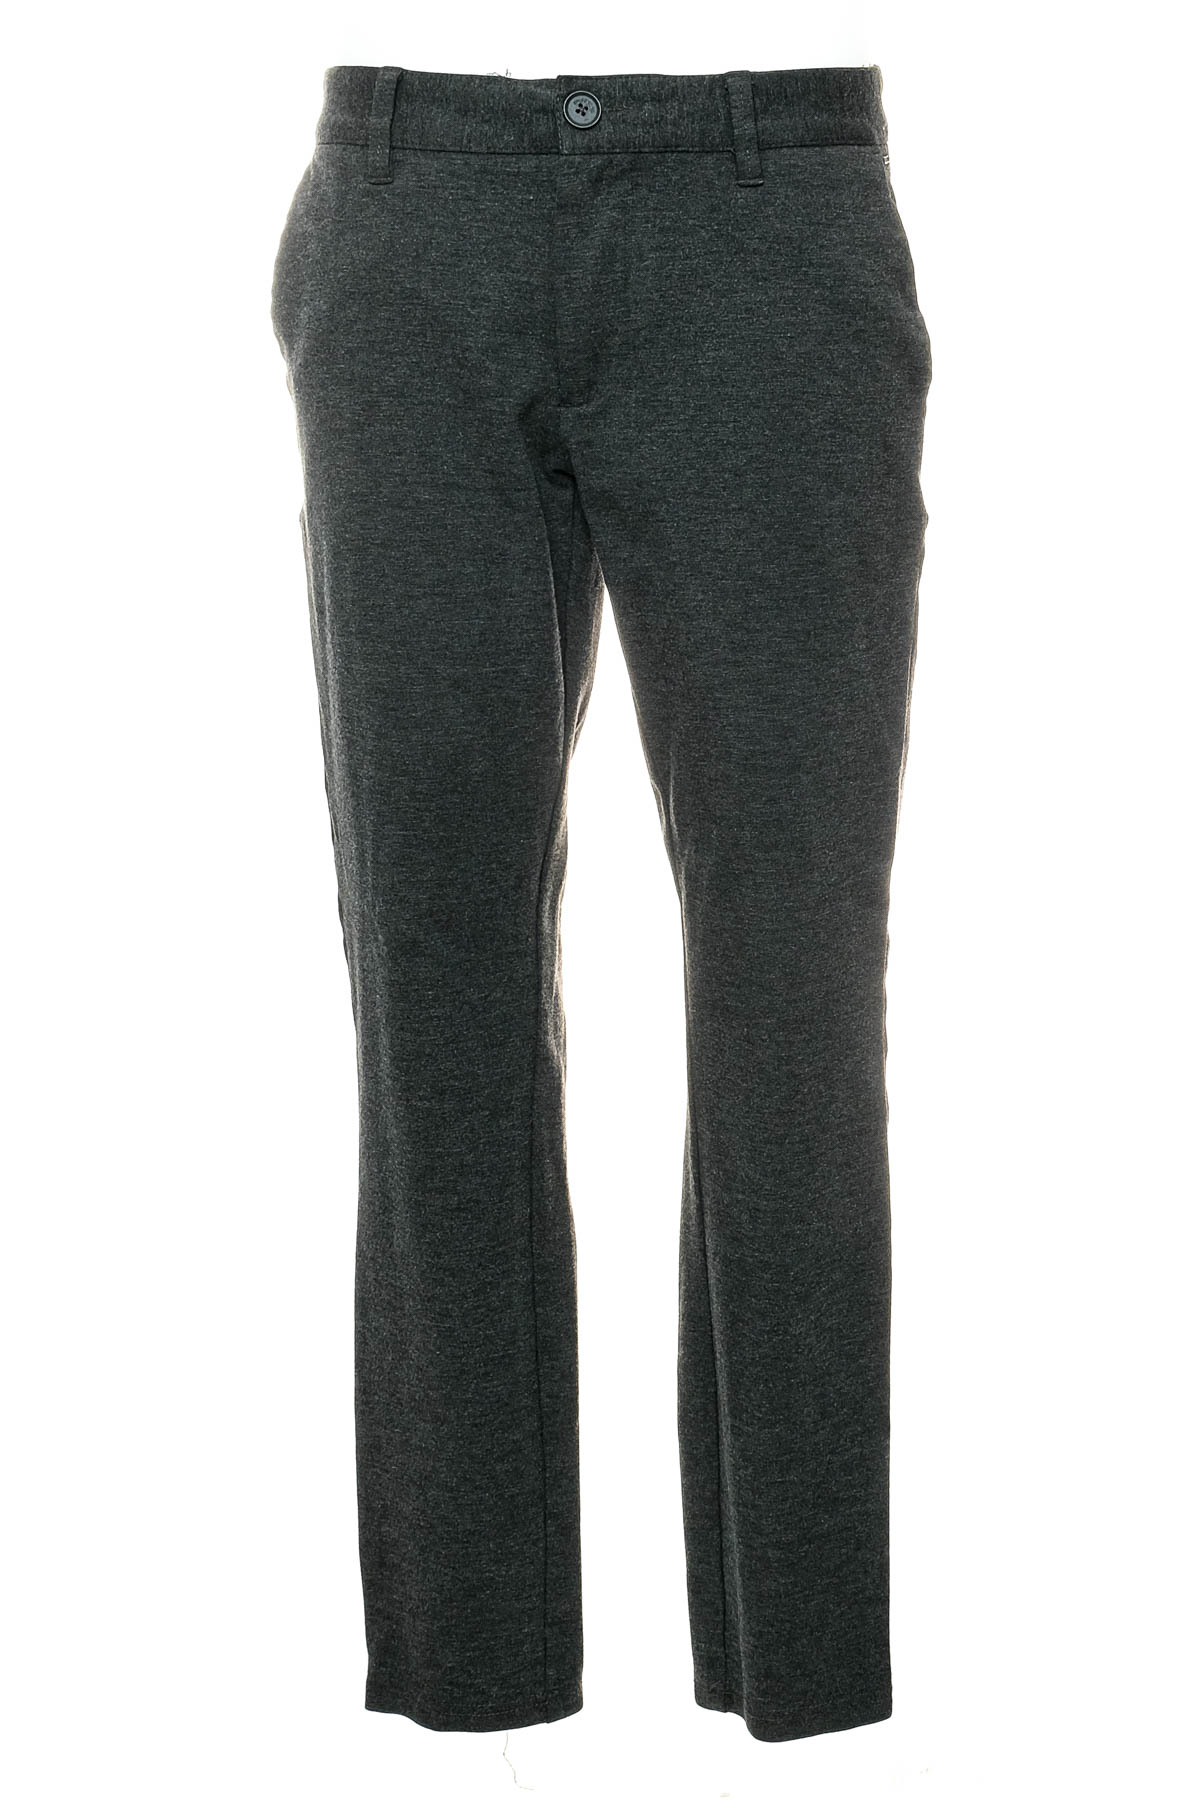 Men's trousers - ONLY & SONS - 0